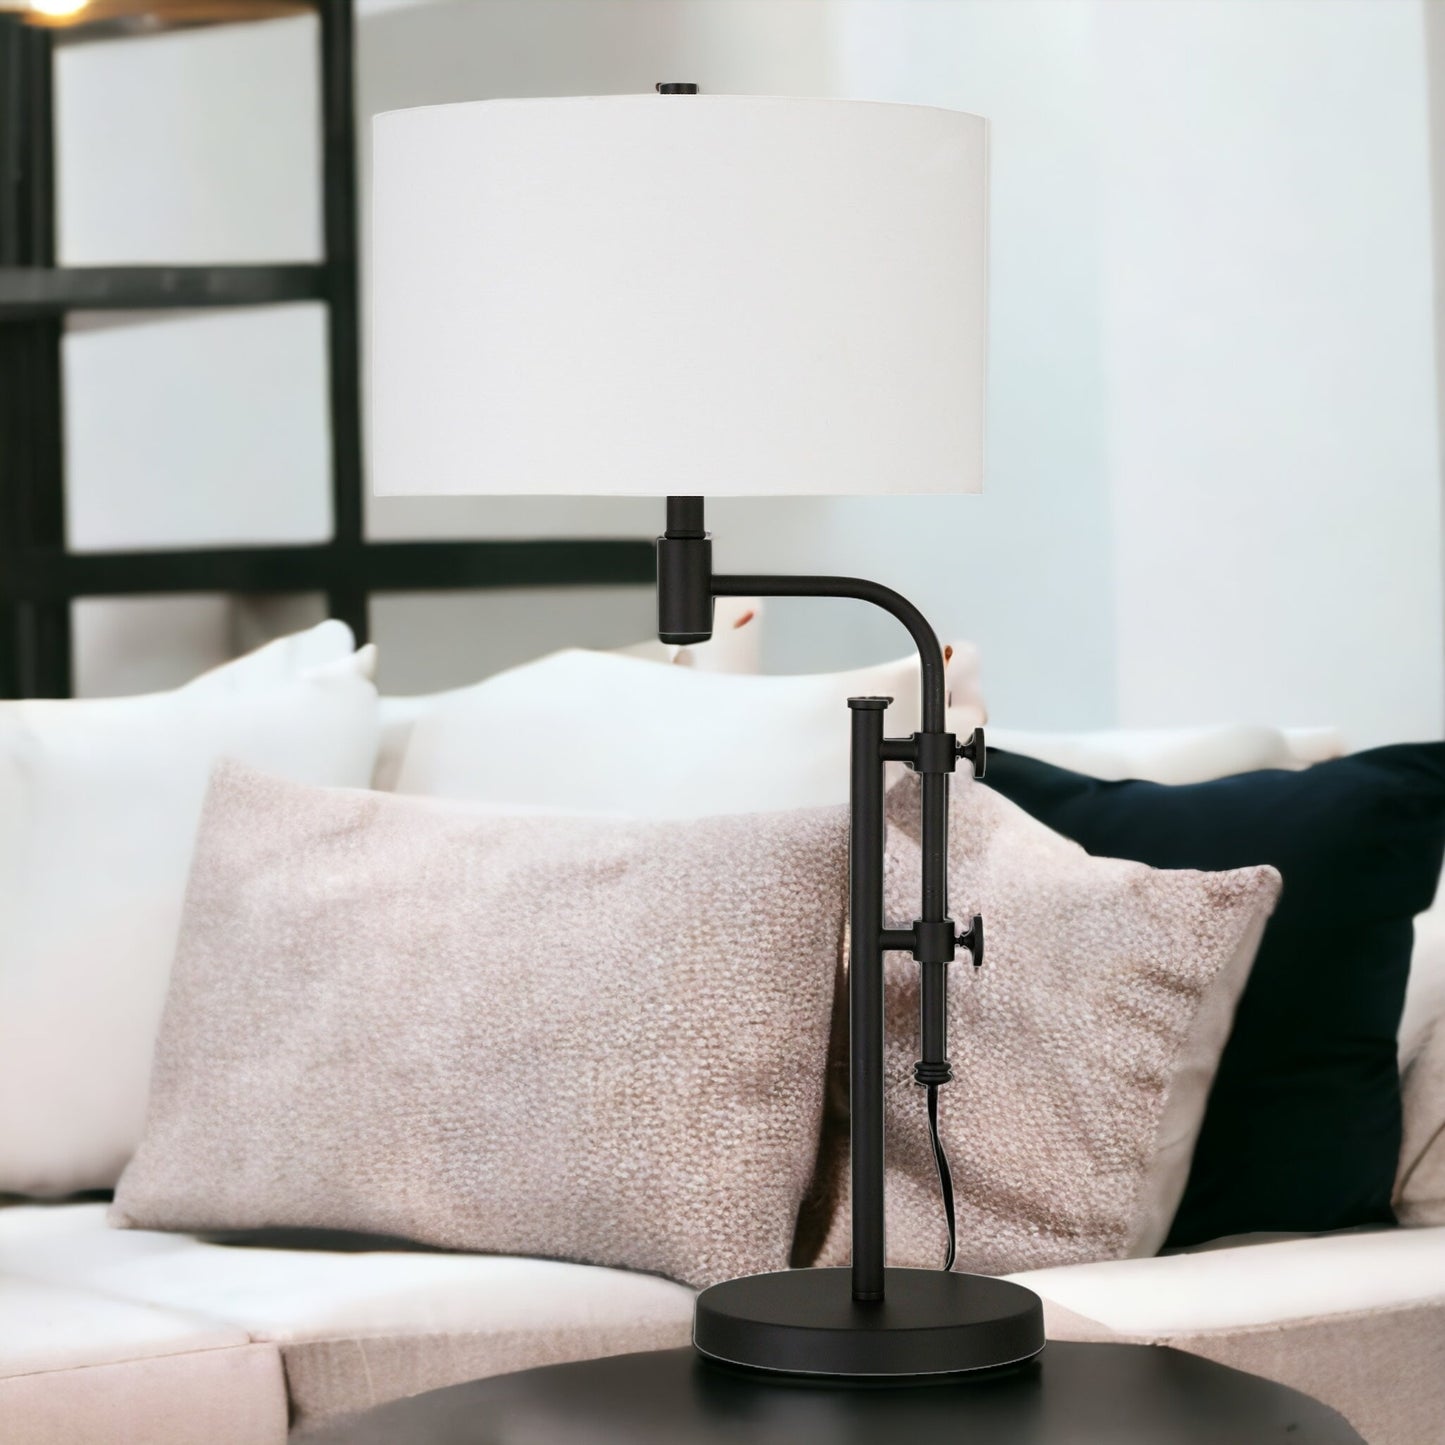 32" Black Metal Adjustable Table Lamp With White Drum Shade